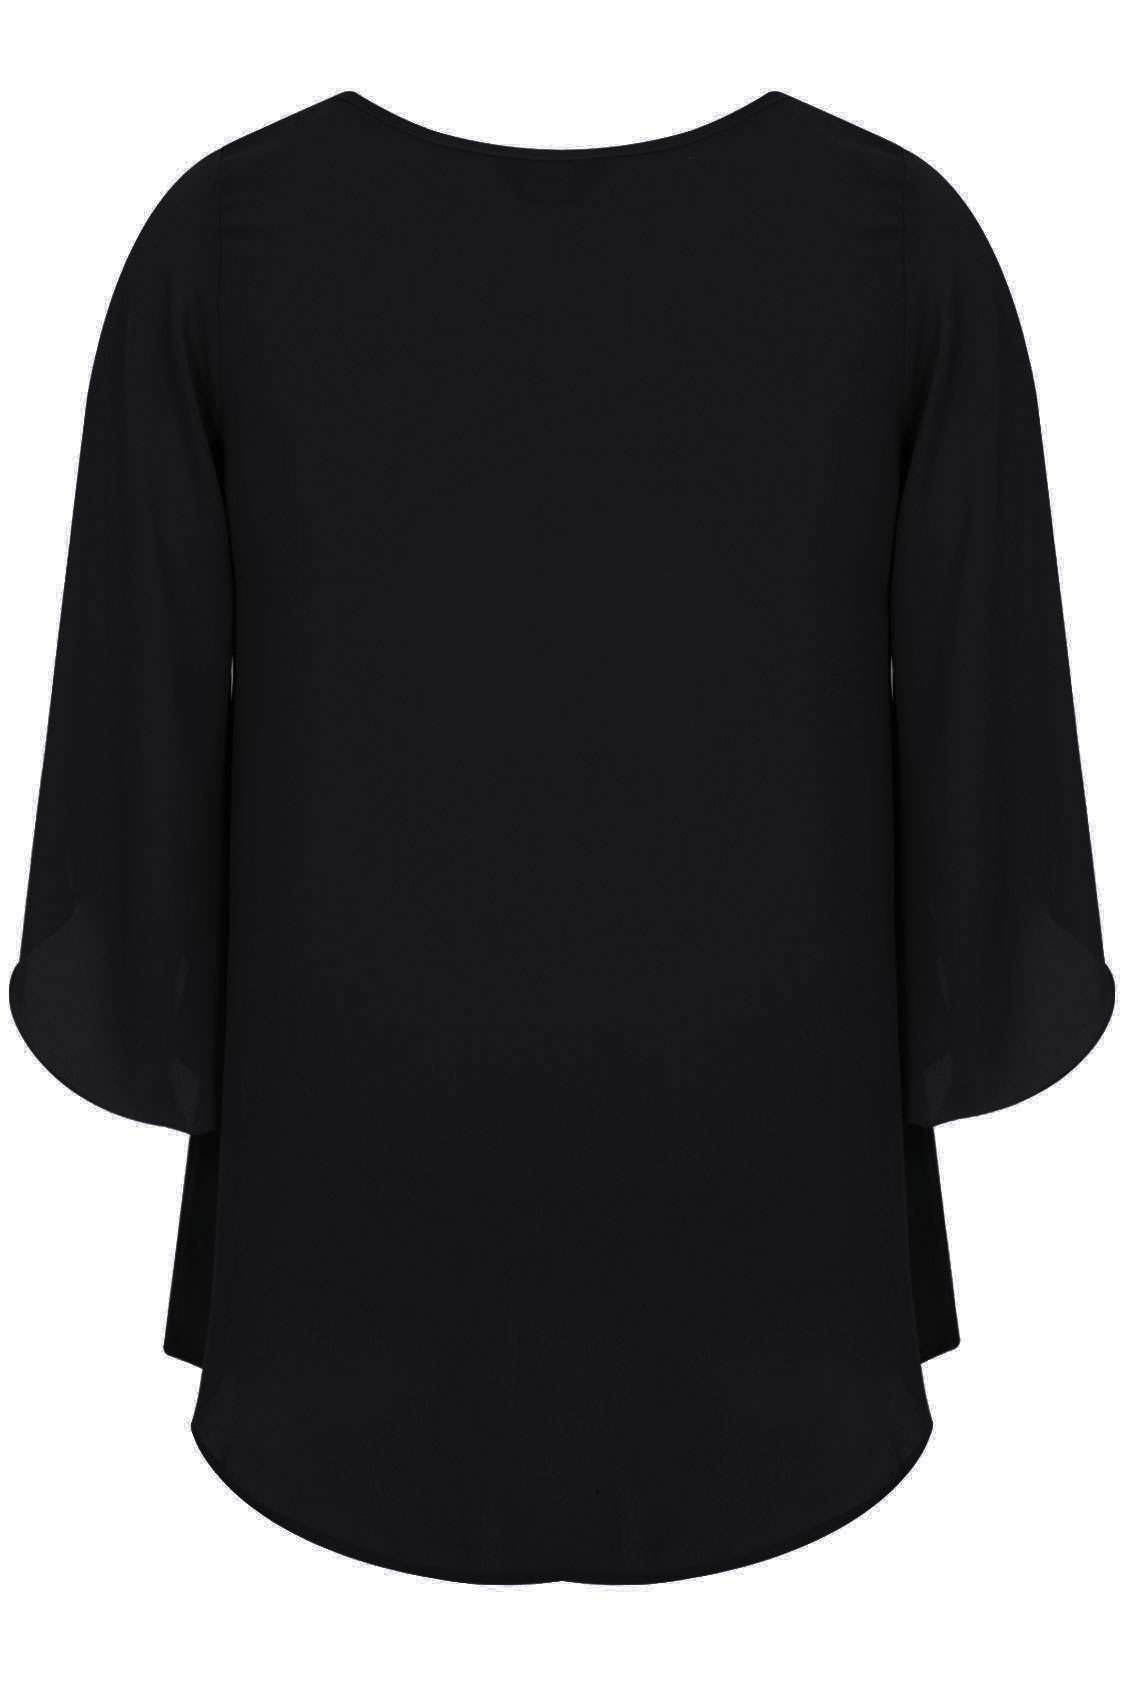 Black Chiffon Blouse With Split Angel Sleeves Plus Size 16 to 32